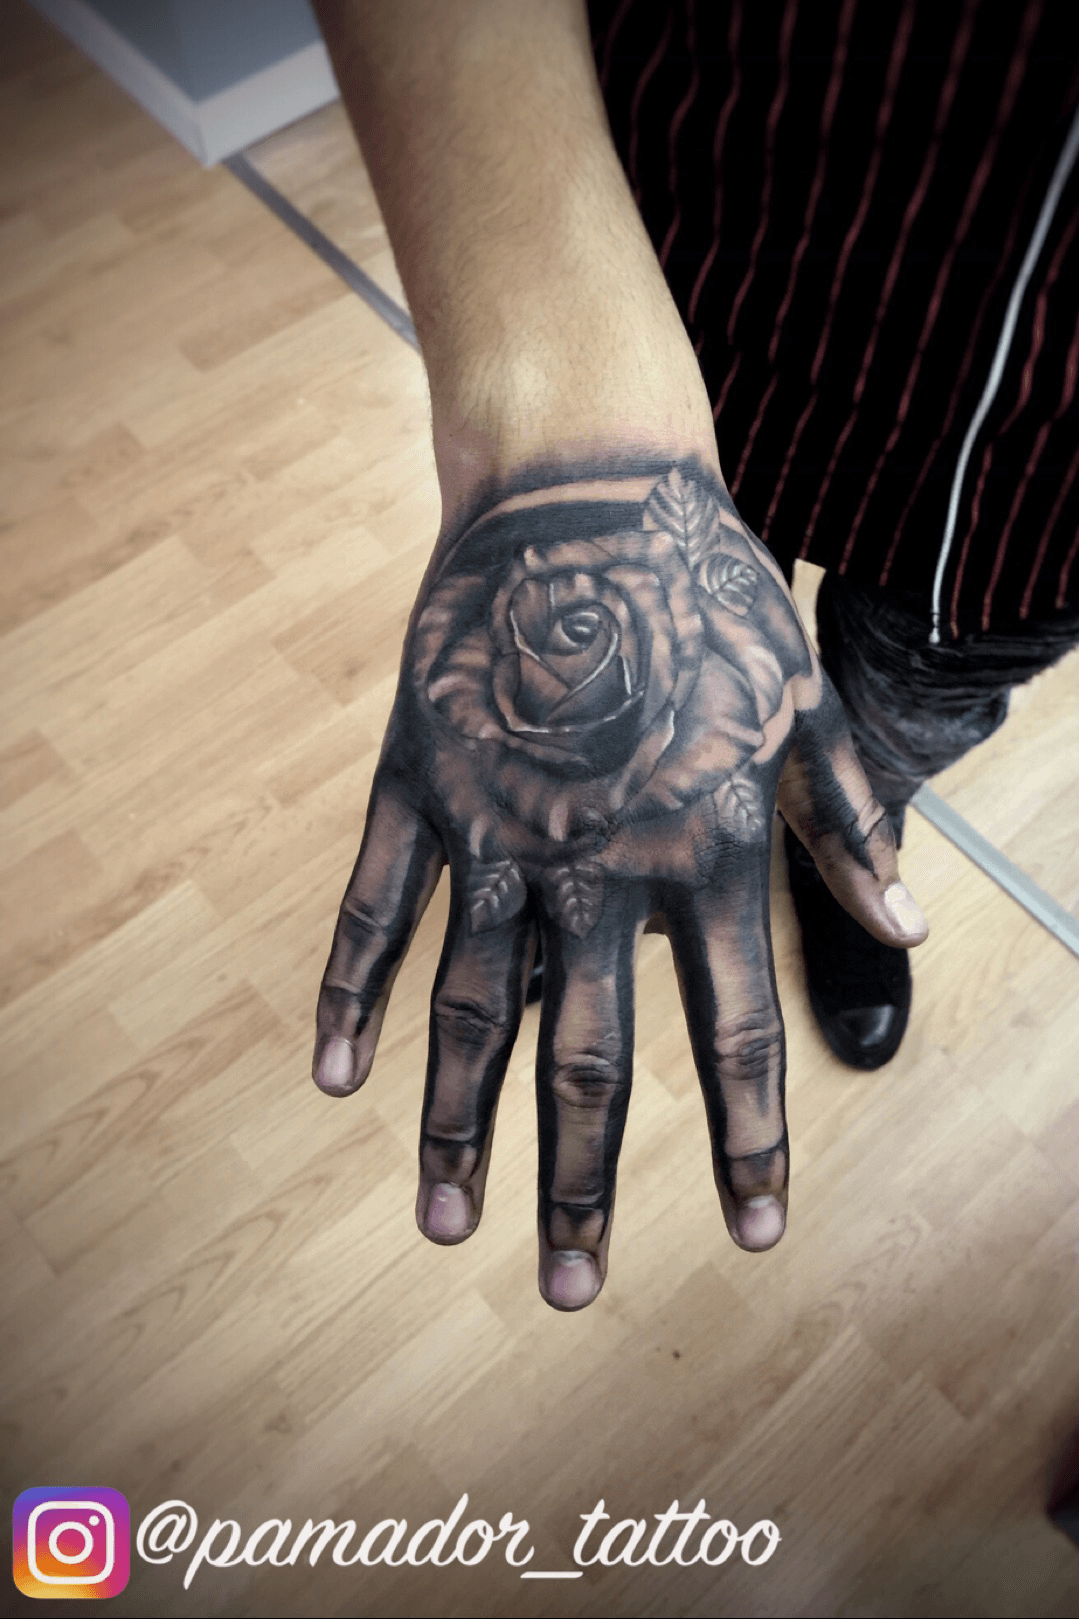 Rose and Skull Tattoo Meaning  What Does the Combination Symbolize  Next  Luxury